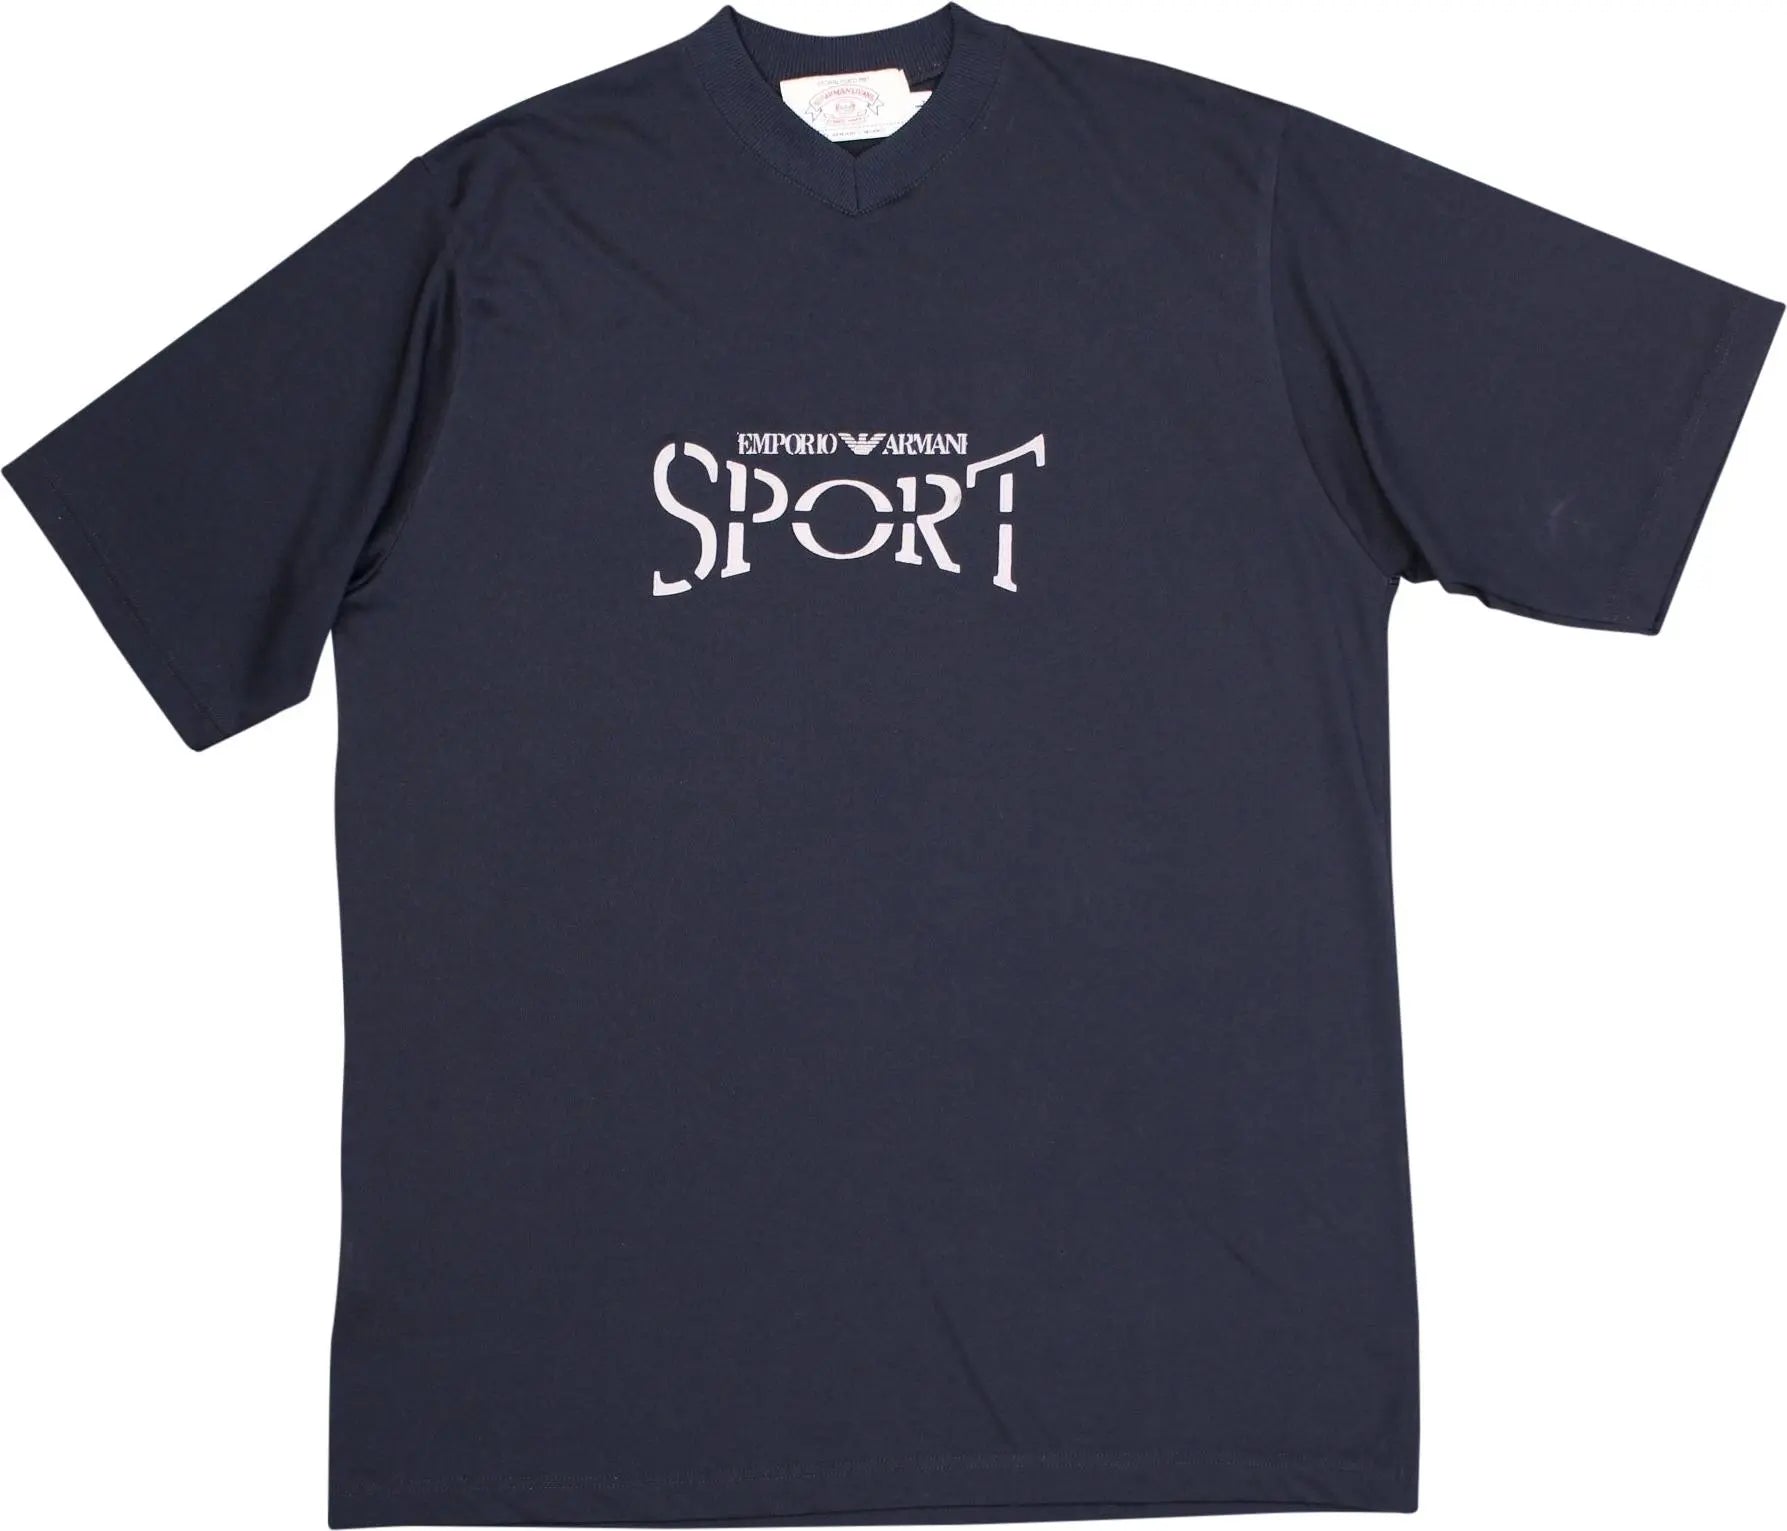 Armani Jeans - Blue T-shirt by Emporio Armani Sport- ThriftTale.com - Vintage and second handclothing